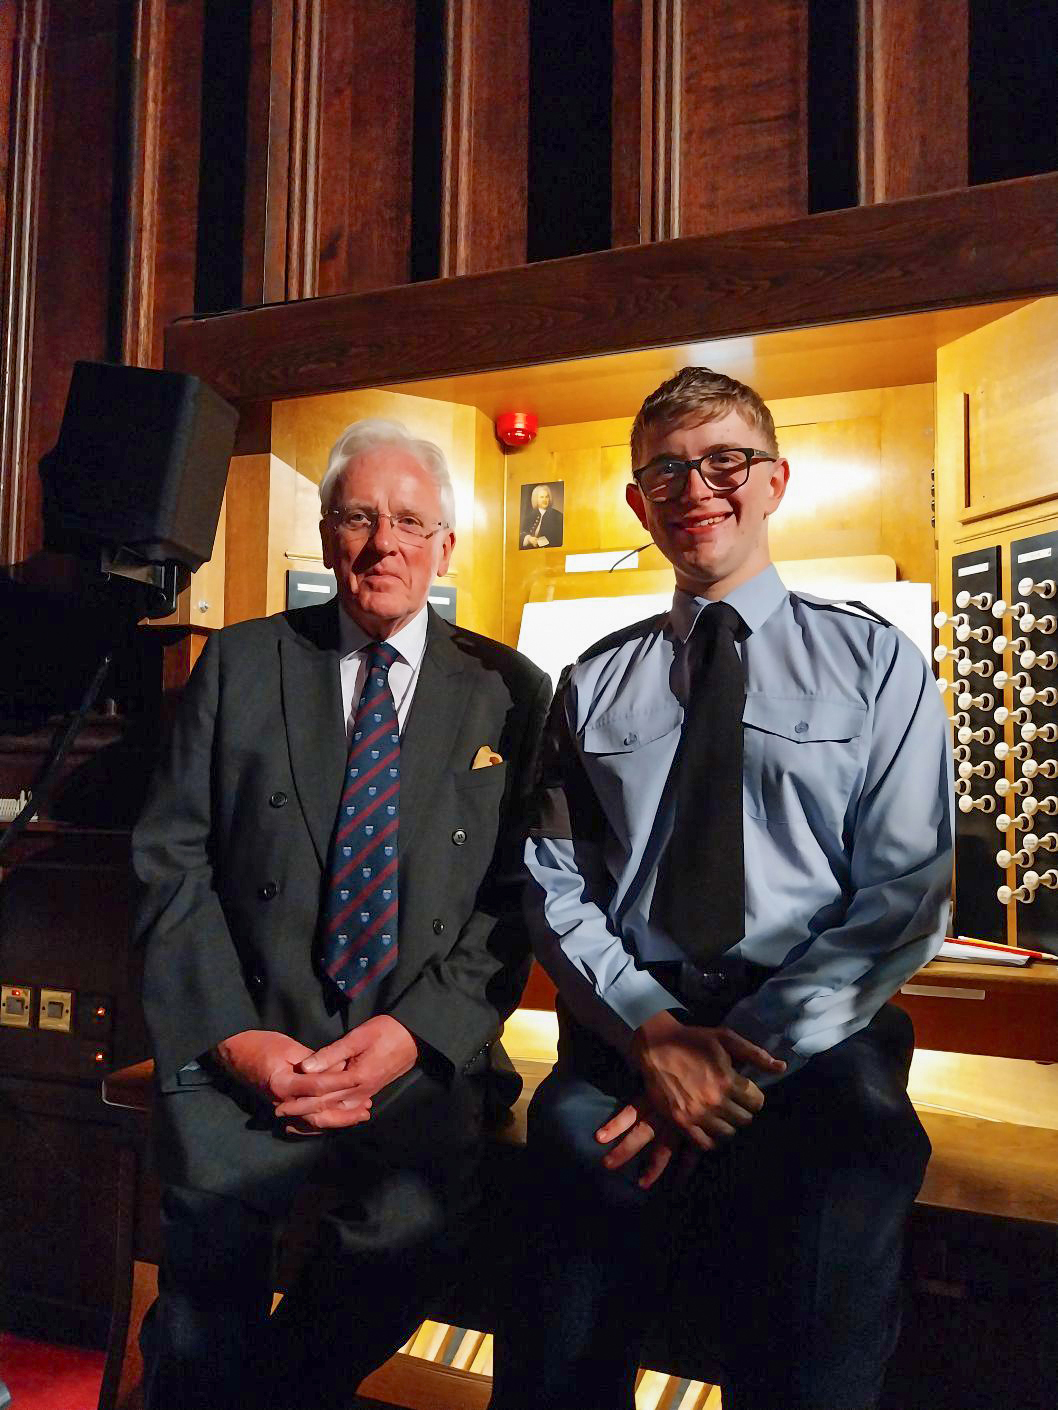 Cdt Sgt Will Bishop with Sir Andrew Parmley at the Willis Organ